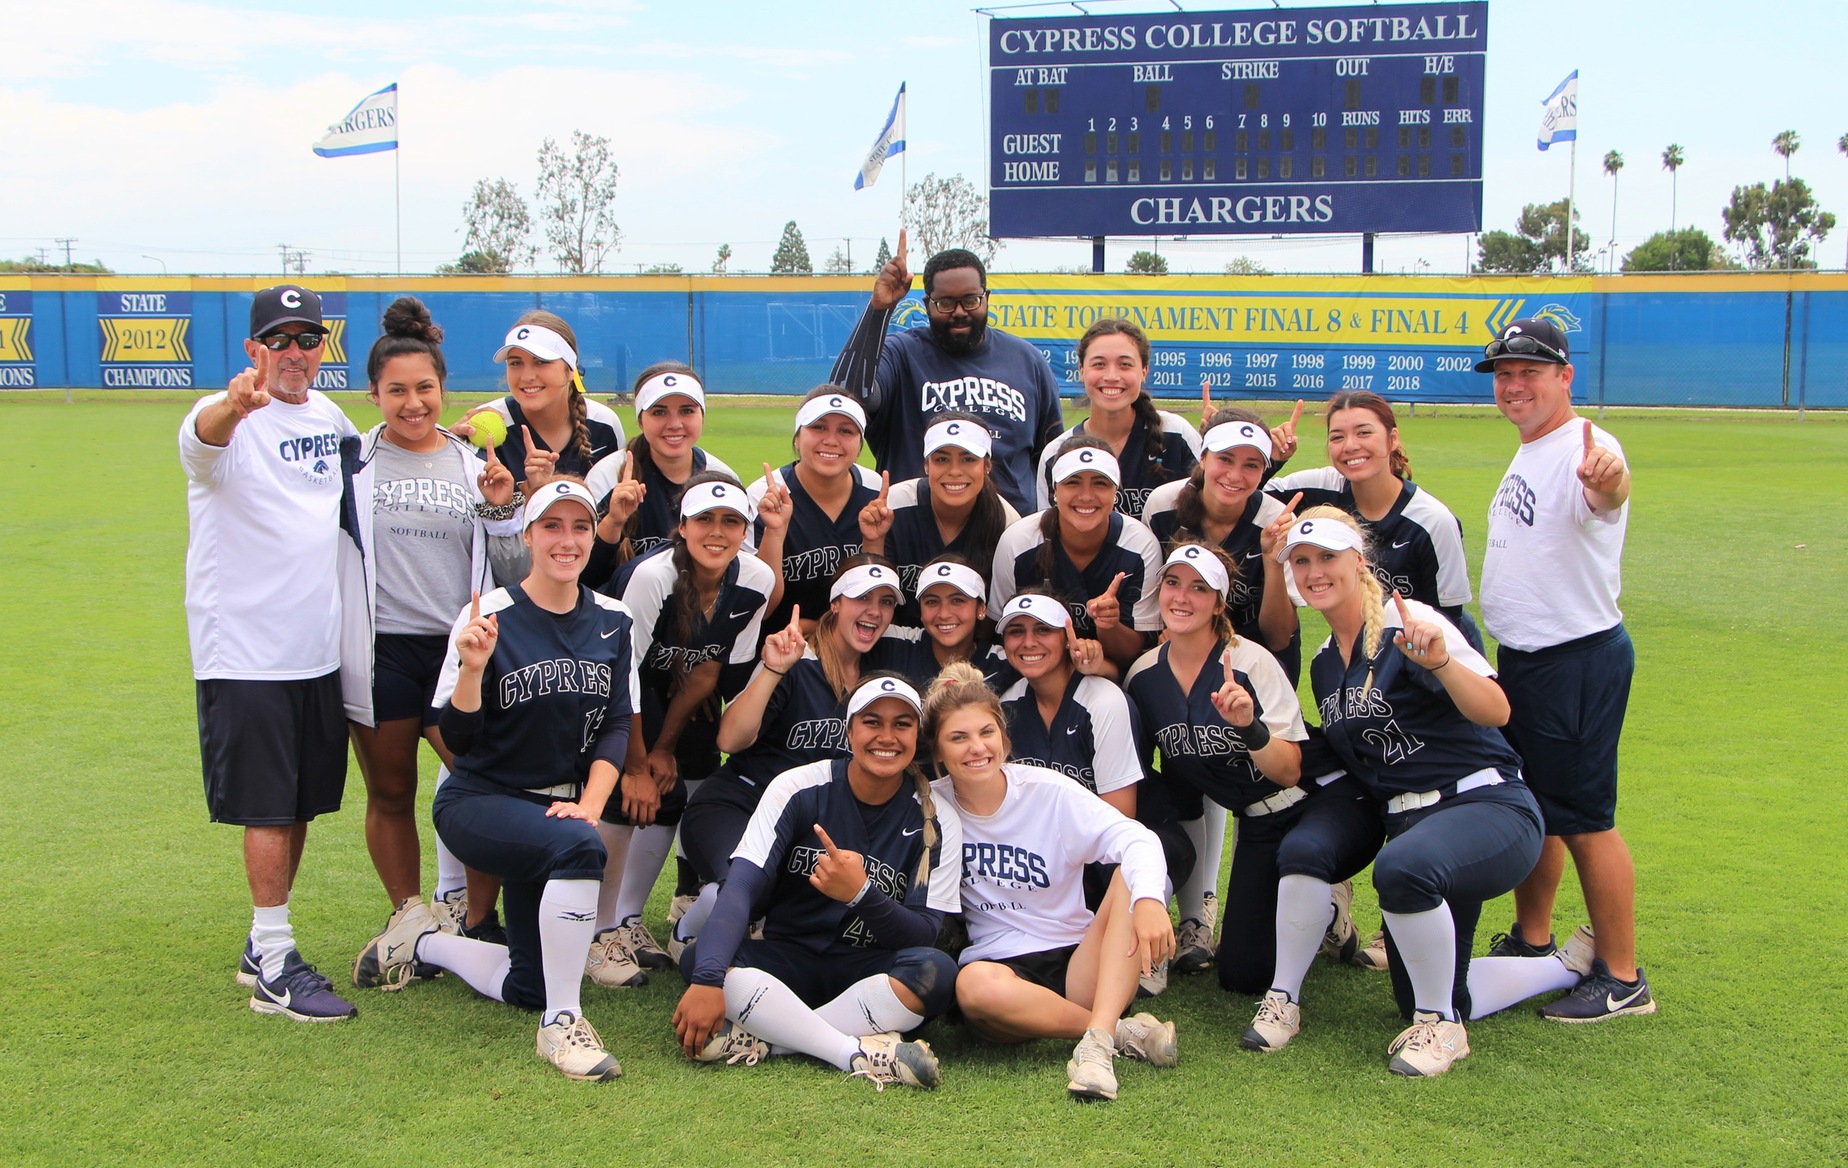 Cypress Softball Headed to Fifth Consecutive CCCAA State Championship Tournament